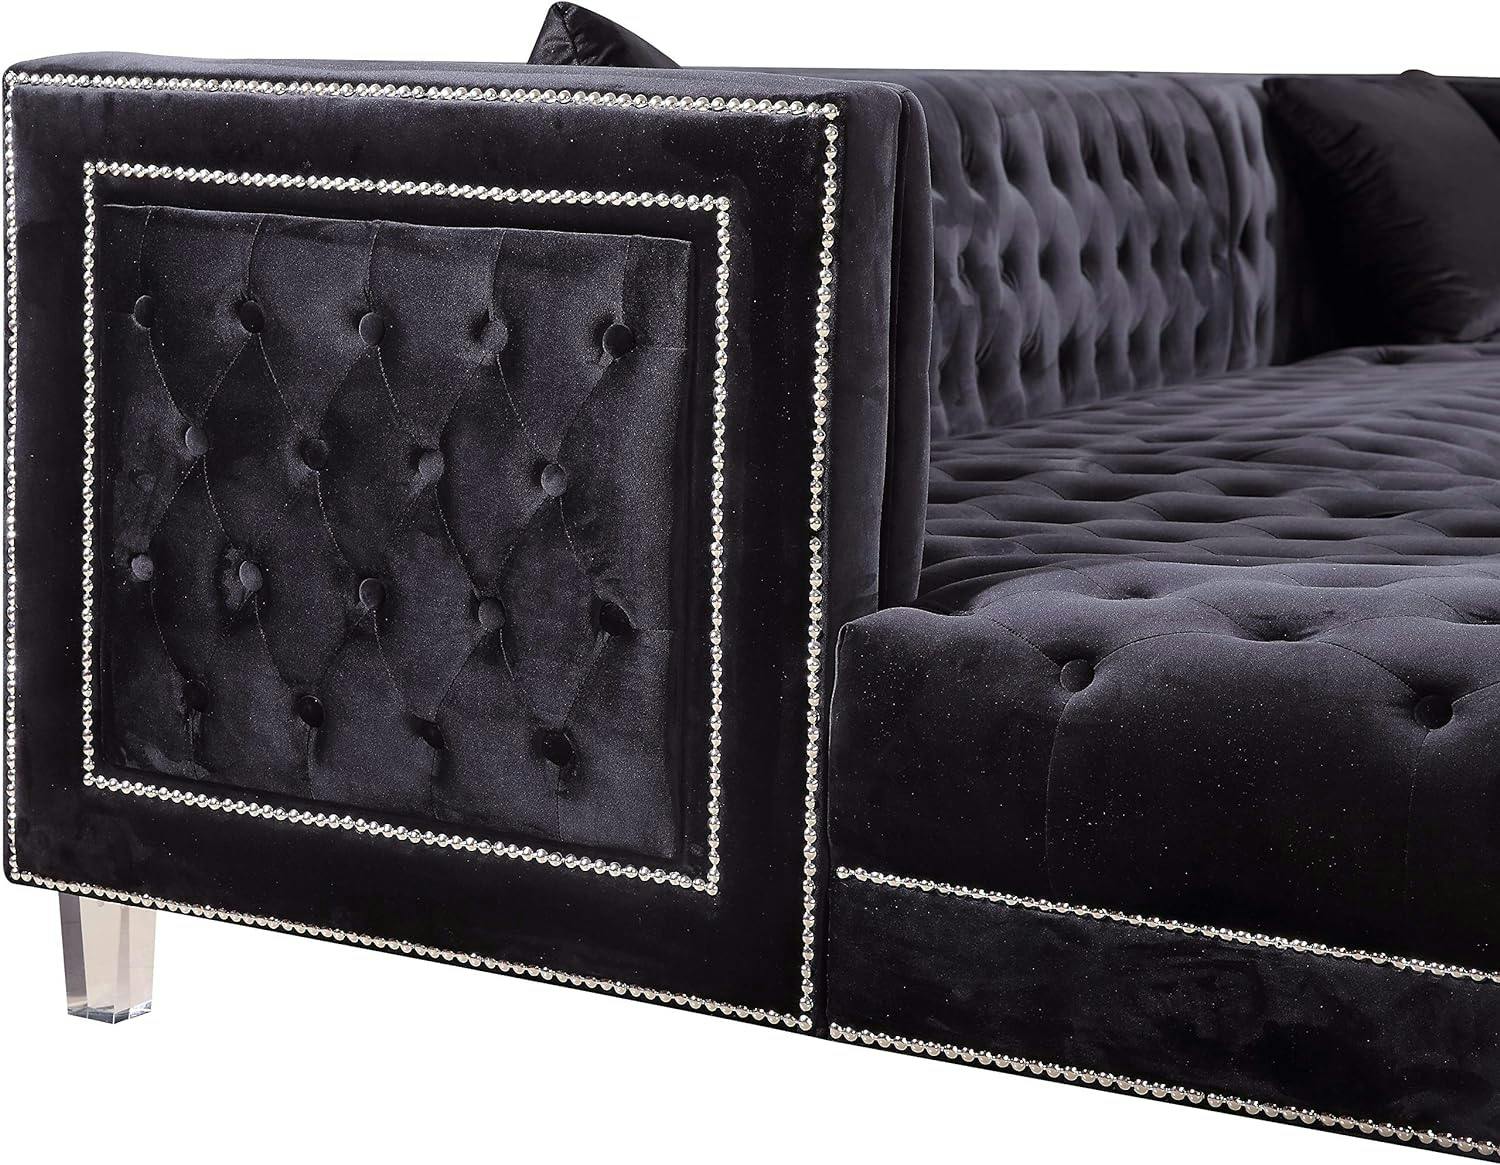 Luxurious Black Velvet Tufted 3-Piece Sectional with Nailhead Accents